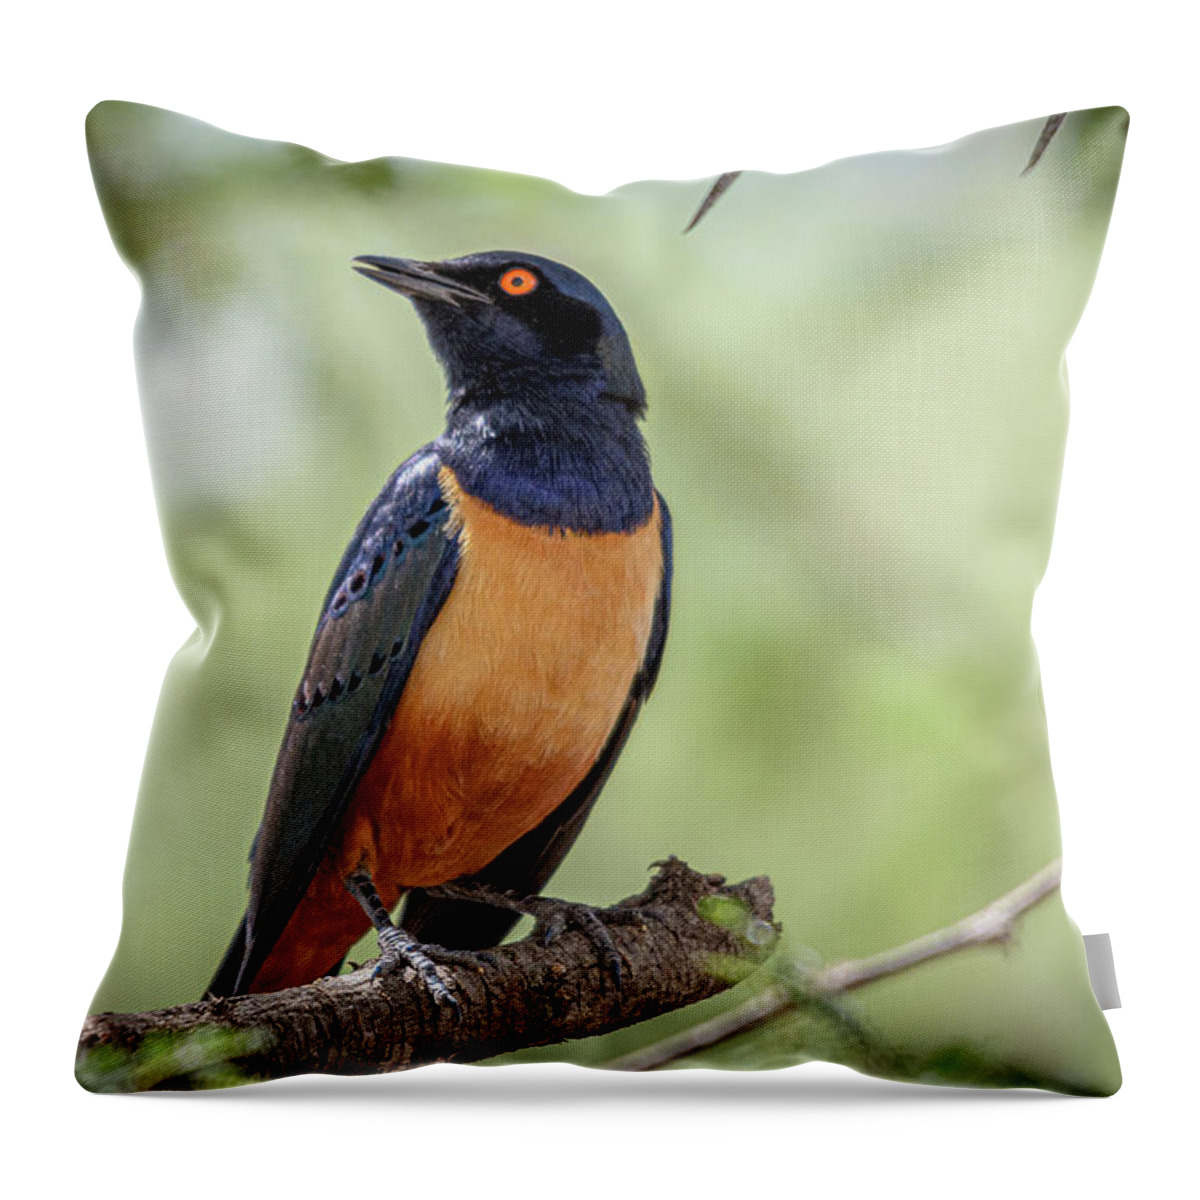 Africa Throw Pillow featuring the photograph Hildebrandt's Starling on Perch by Adrian O Brien